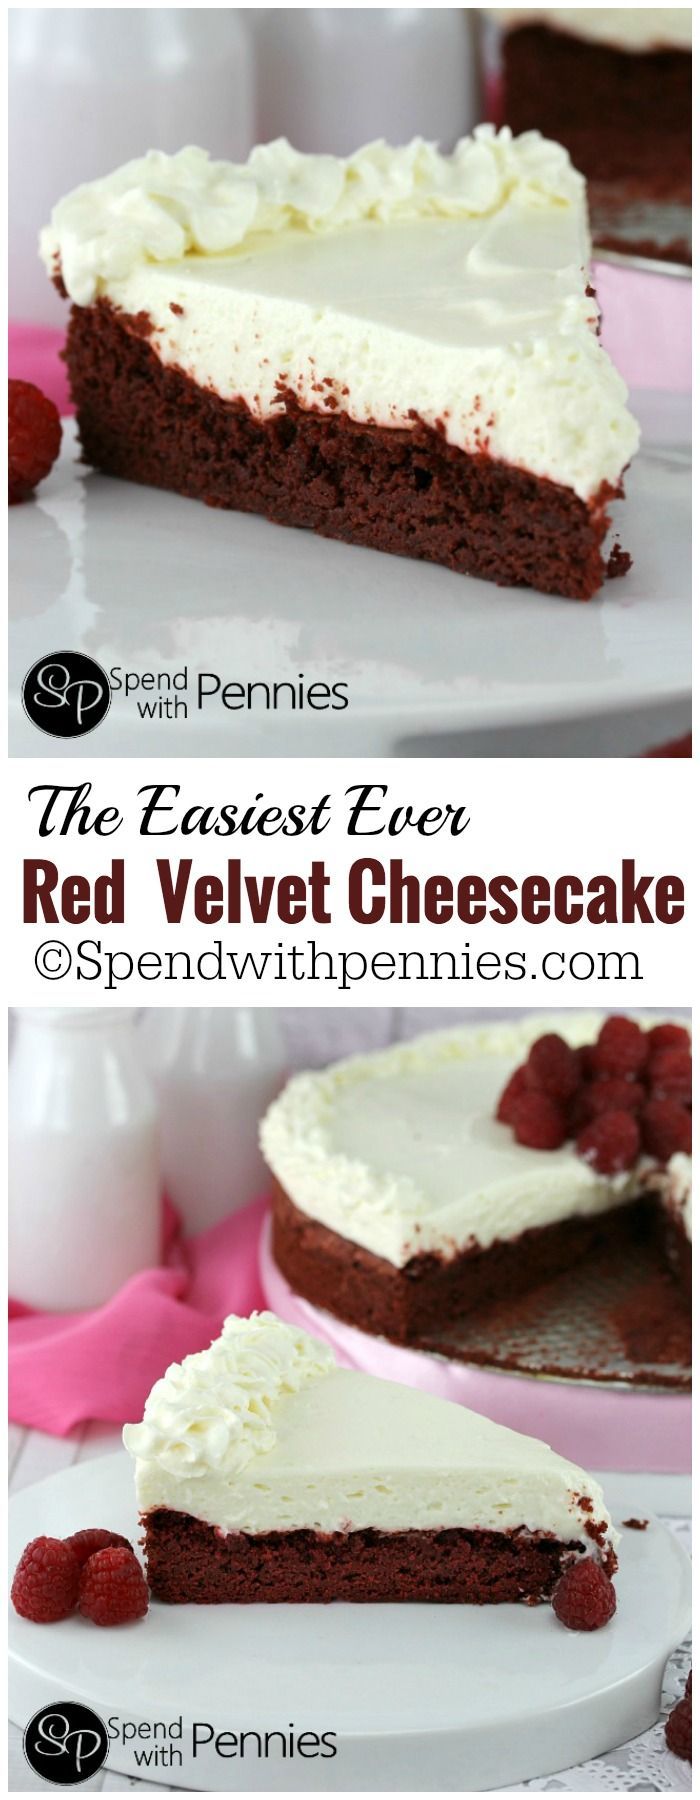 This is one of the easiest Red Velvet Cheesecake recipes you'll find! A simple Red Velvet cake topped with a deliciously quick no-bake cheesecake! -   23 red velvet cheesecake recipes
 ideas